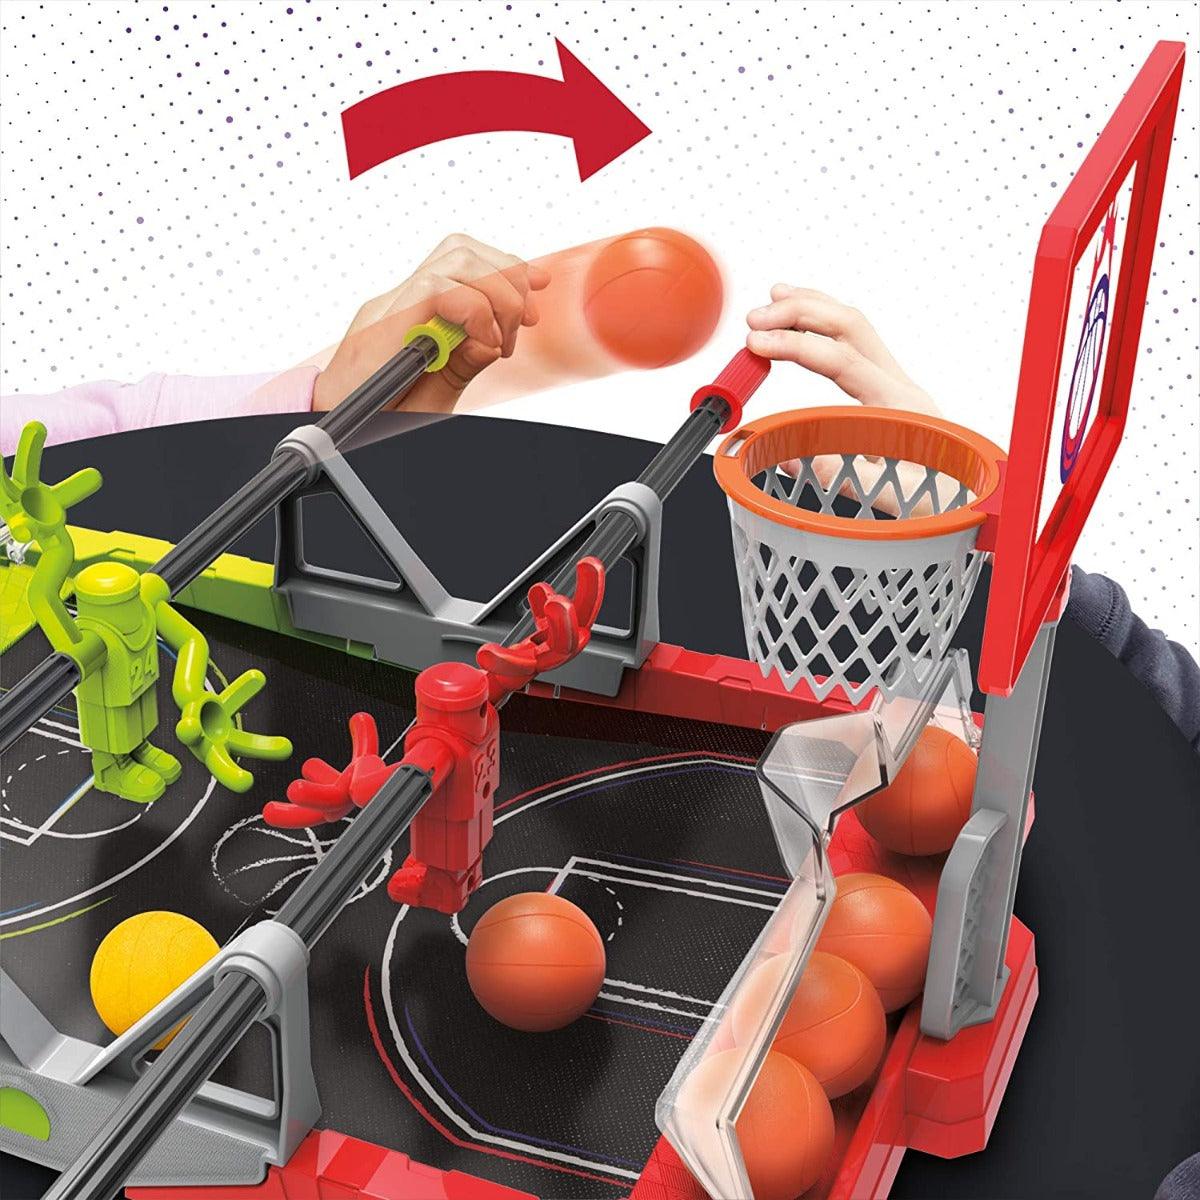 Hasbro Gaming Foosketball - Foosball Plus Basketball Shoot & Score Game for Kids Ages 8 and Up